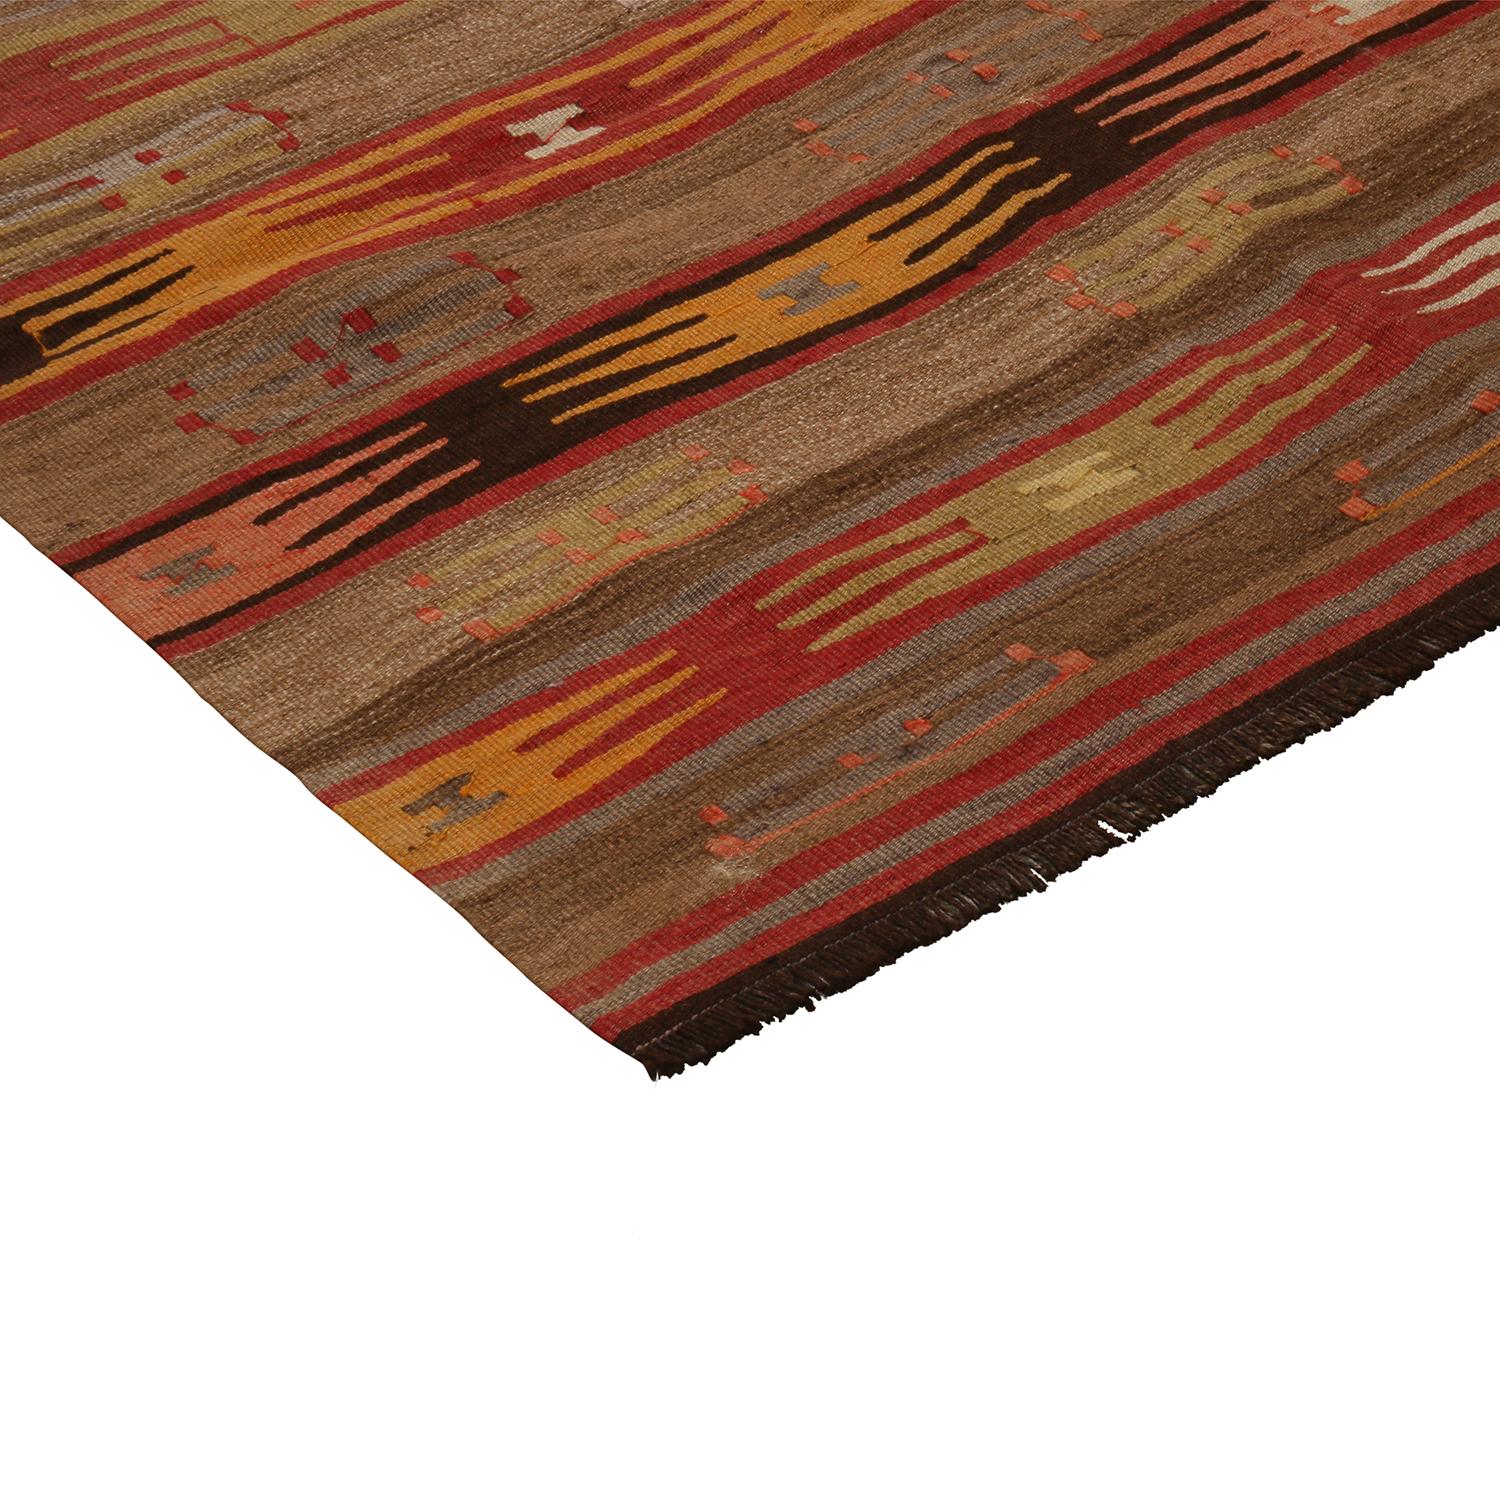 Vintage Geometric Beige-Brown Wool Kilim Rug Multi-Color Accent by Rug & Kilim In Good Condition For Sale In Long Island City, NY